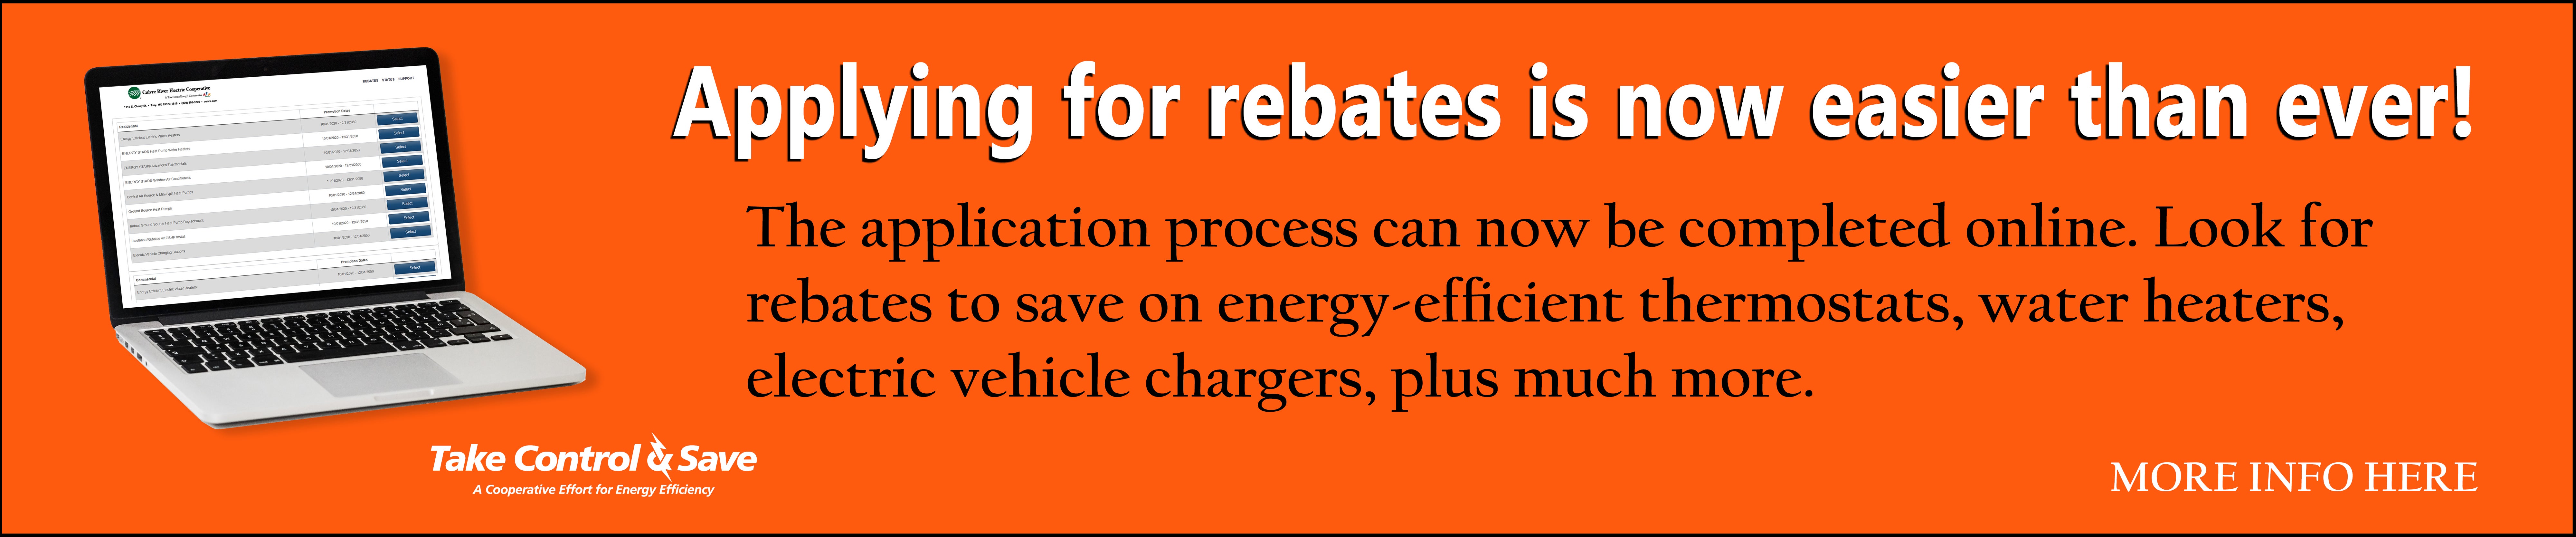 You can now apply for rebates online!